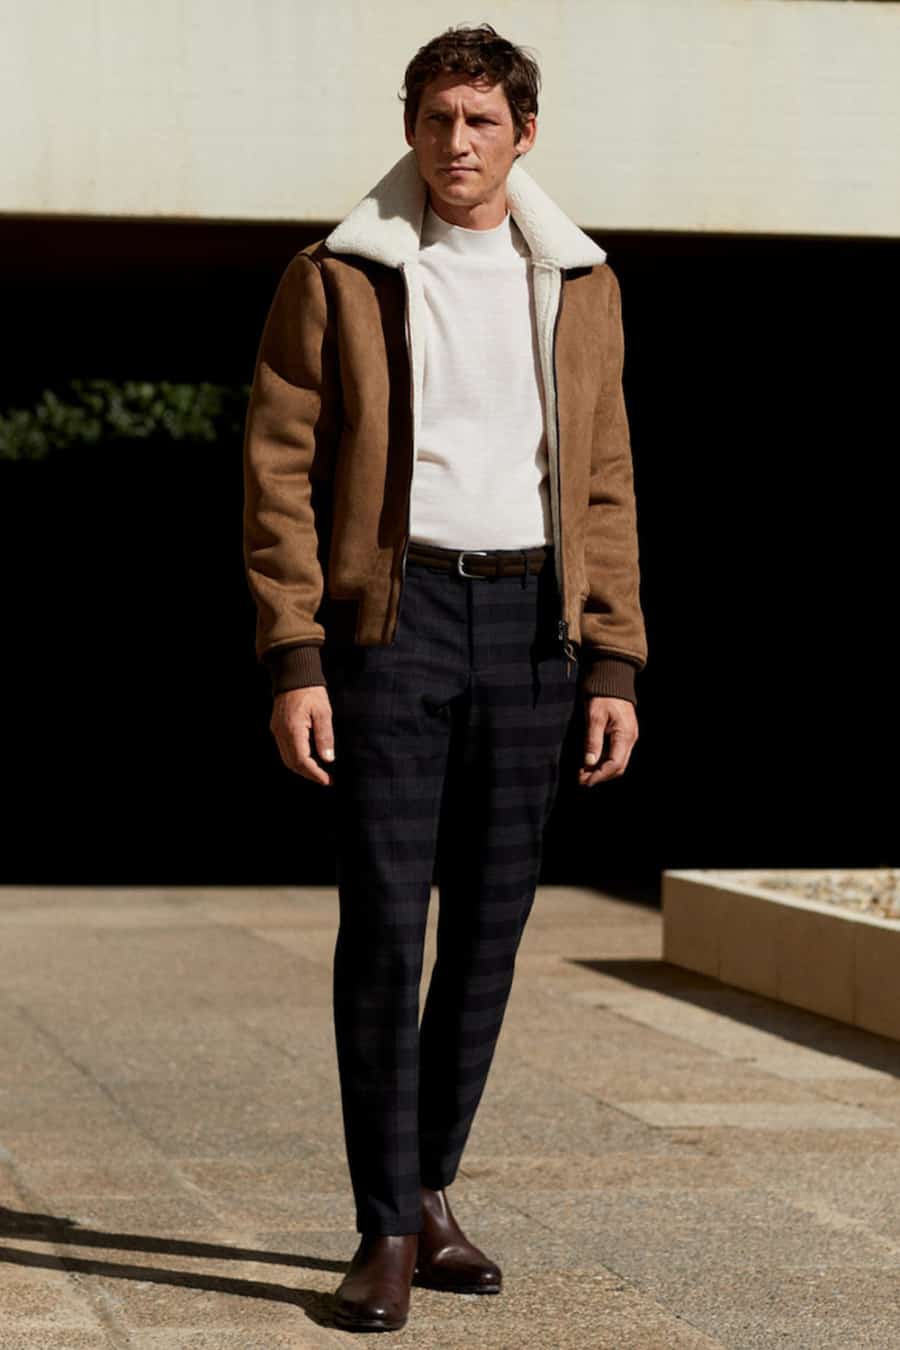 Men's dark checked trousers, brown leather chelsea boots, white roll neck and suede aviator jacket outfit